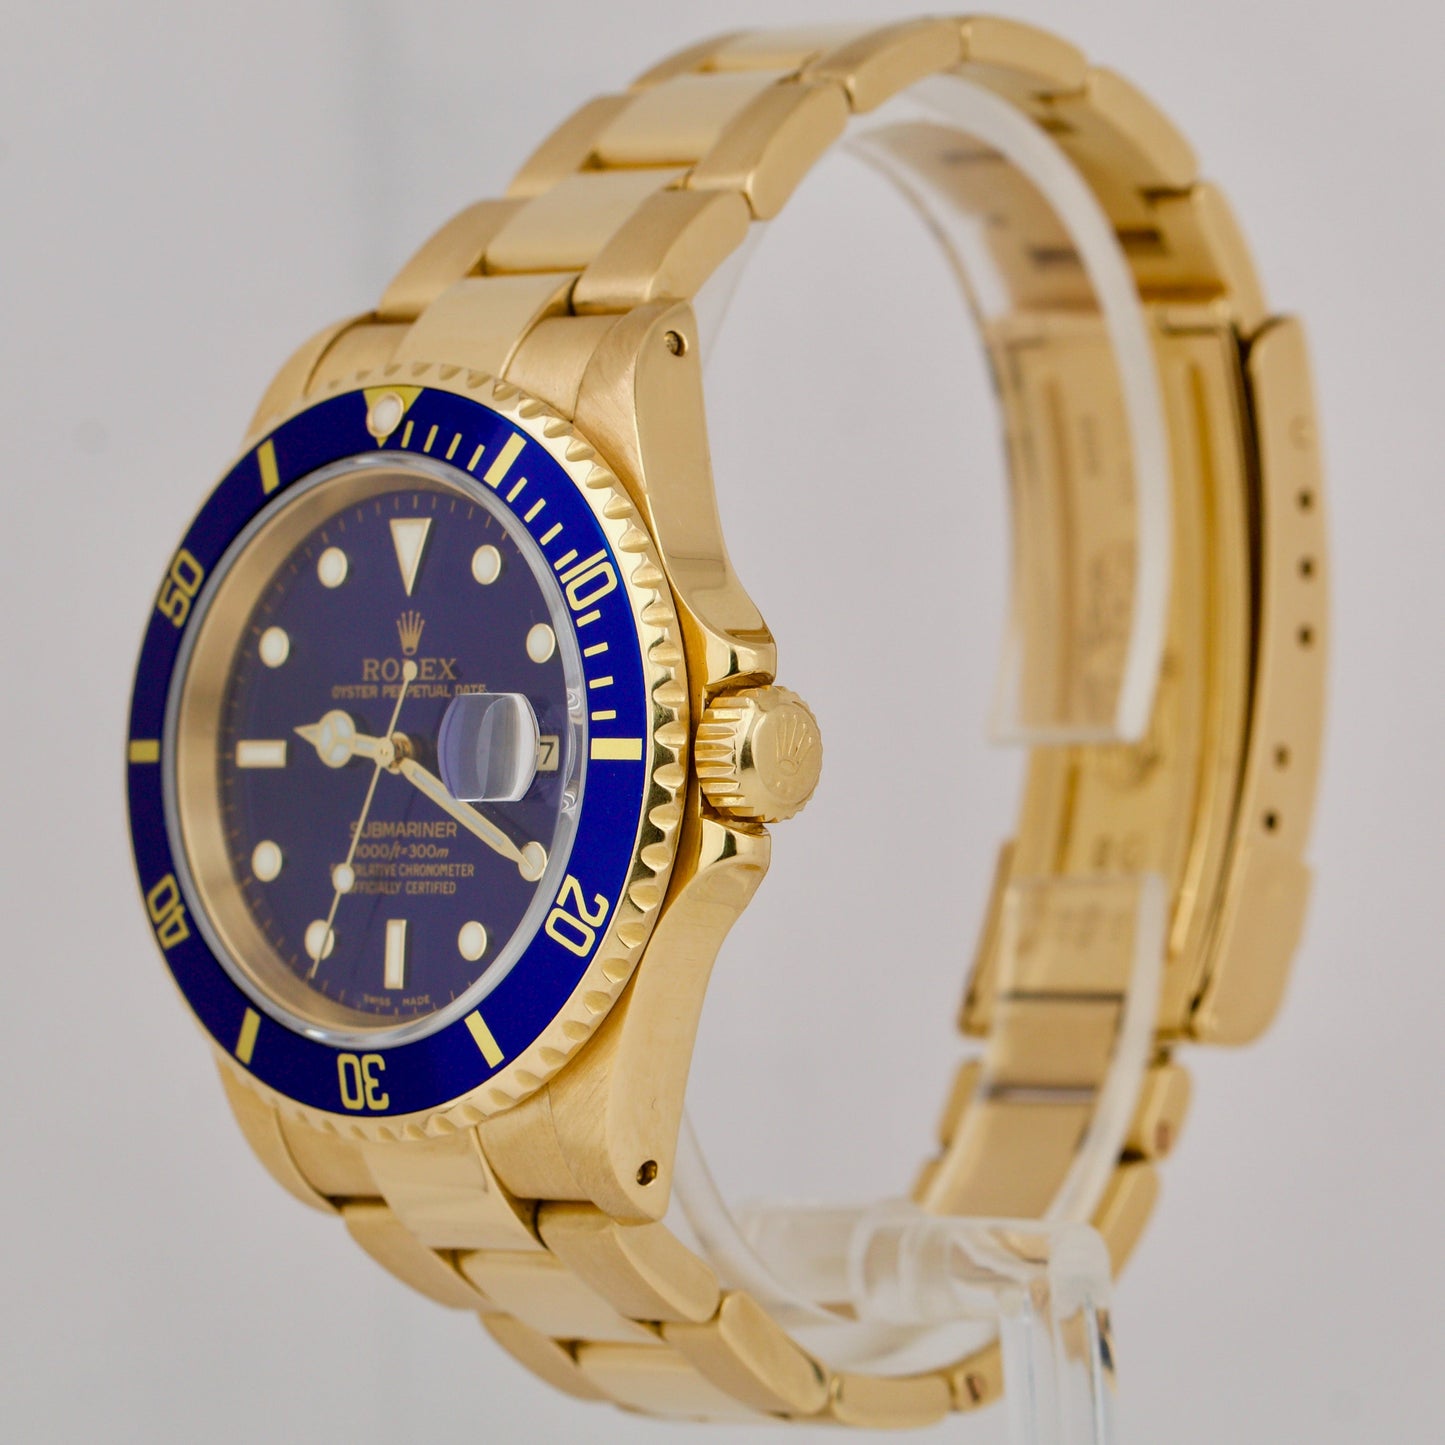 Rolex Submariner Date 18K Yellow Gold BLUE 40mm Automatic Dive 16618 Watch